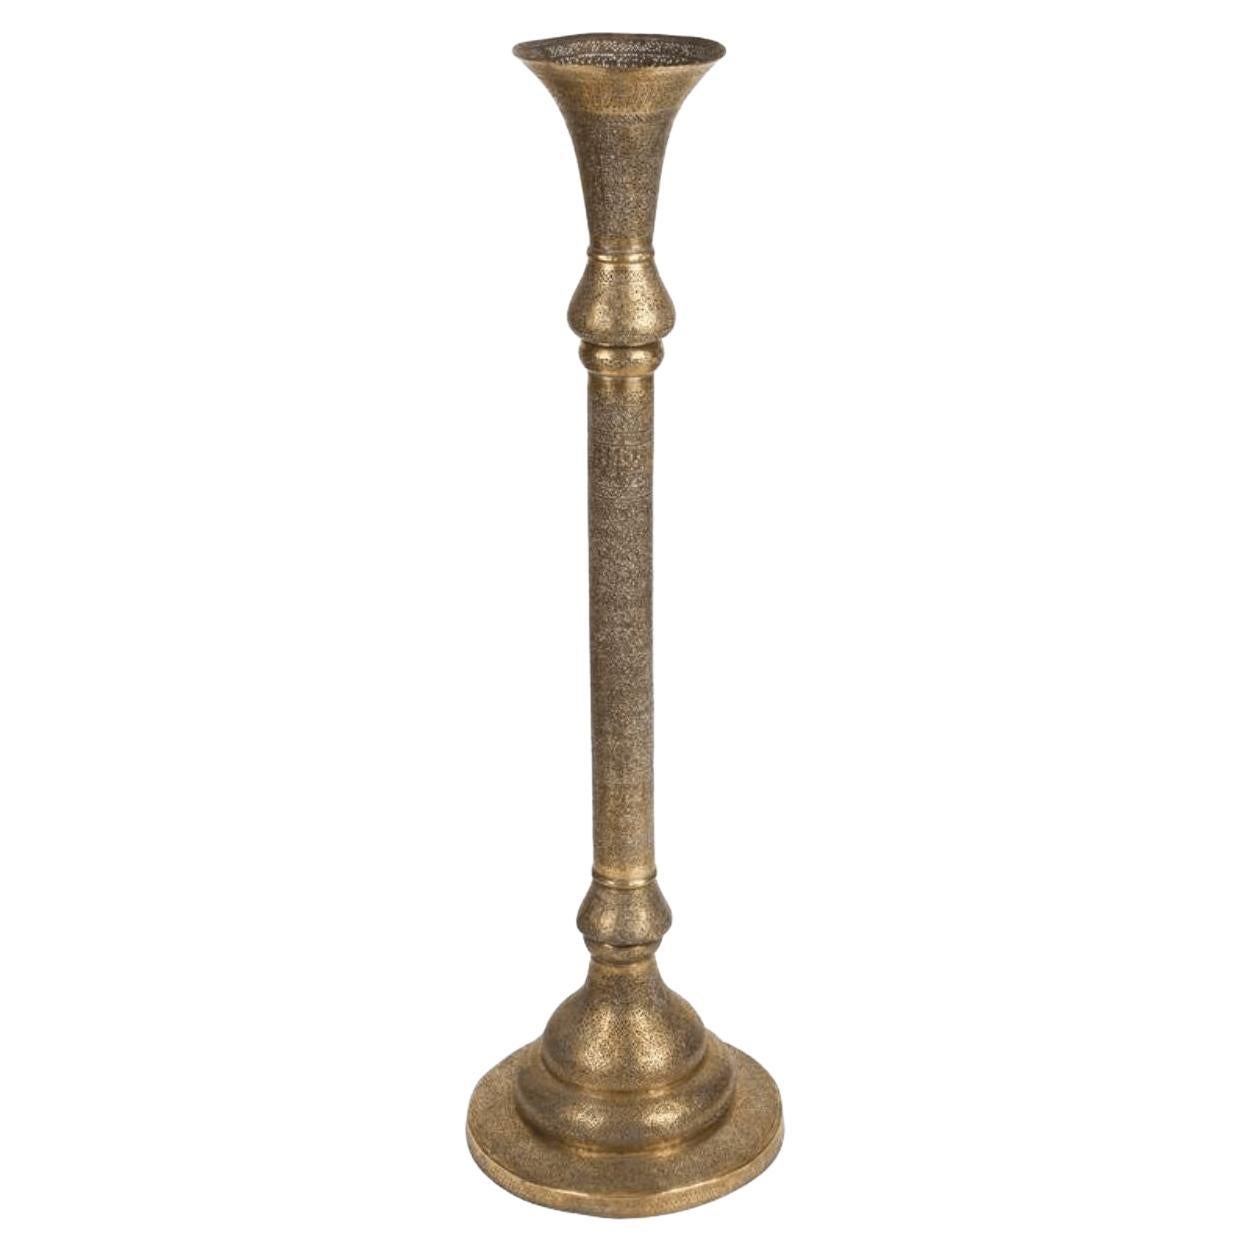 Mid-19th Century, Antique Islamic Brass Candleholder Floor Lamp For Sale